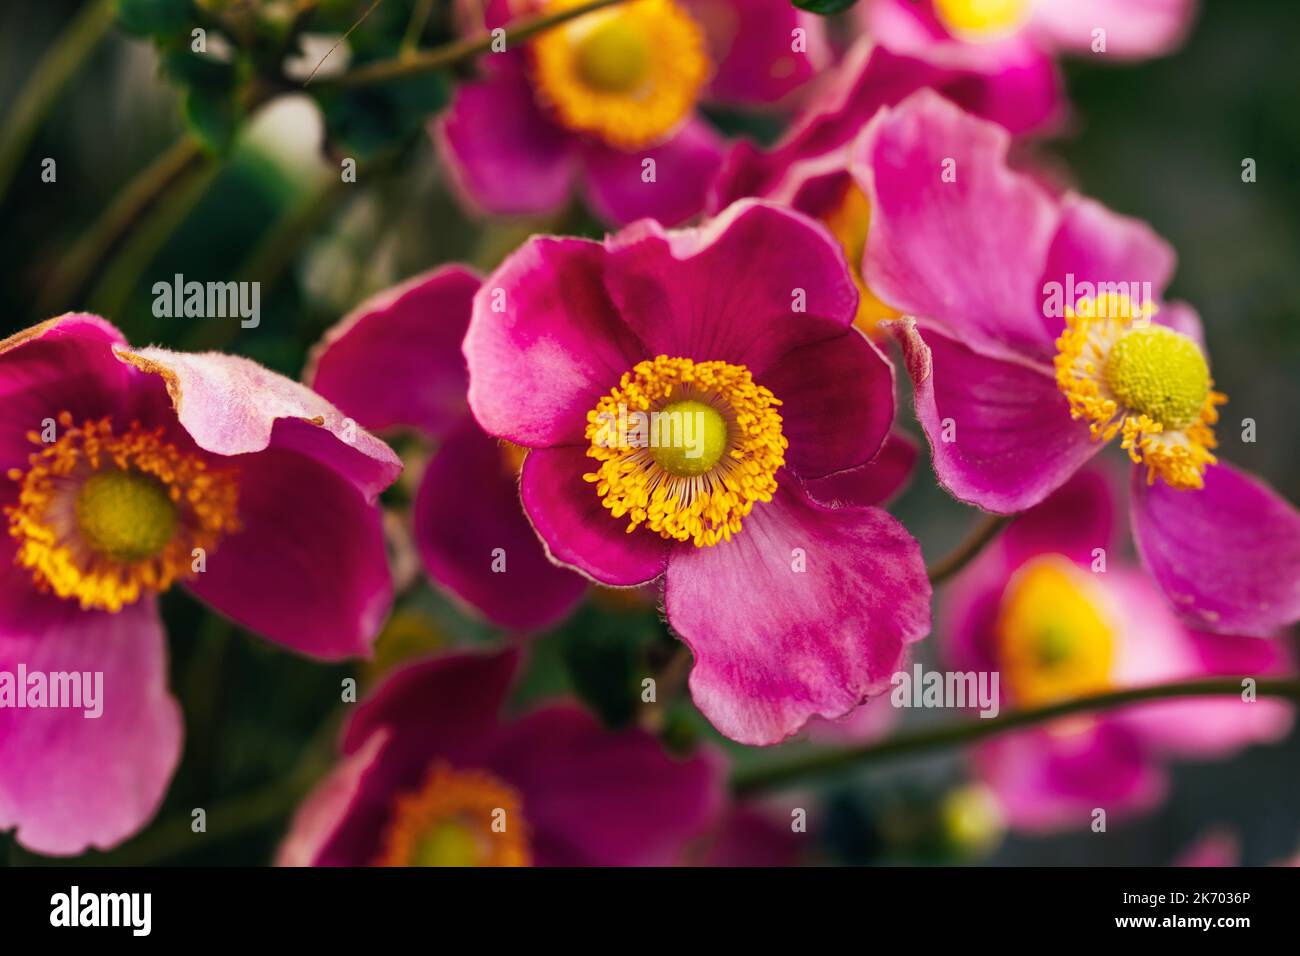 Bright purple autumn anemone flowers Close up. Floral background. Natural light Stock Photo